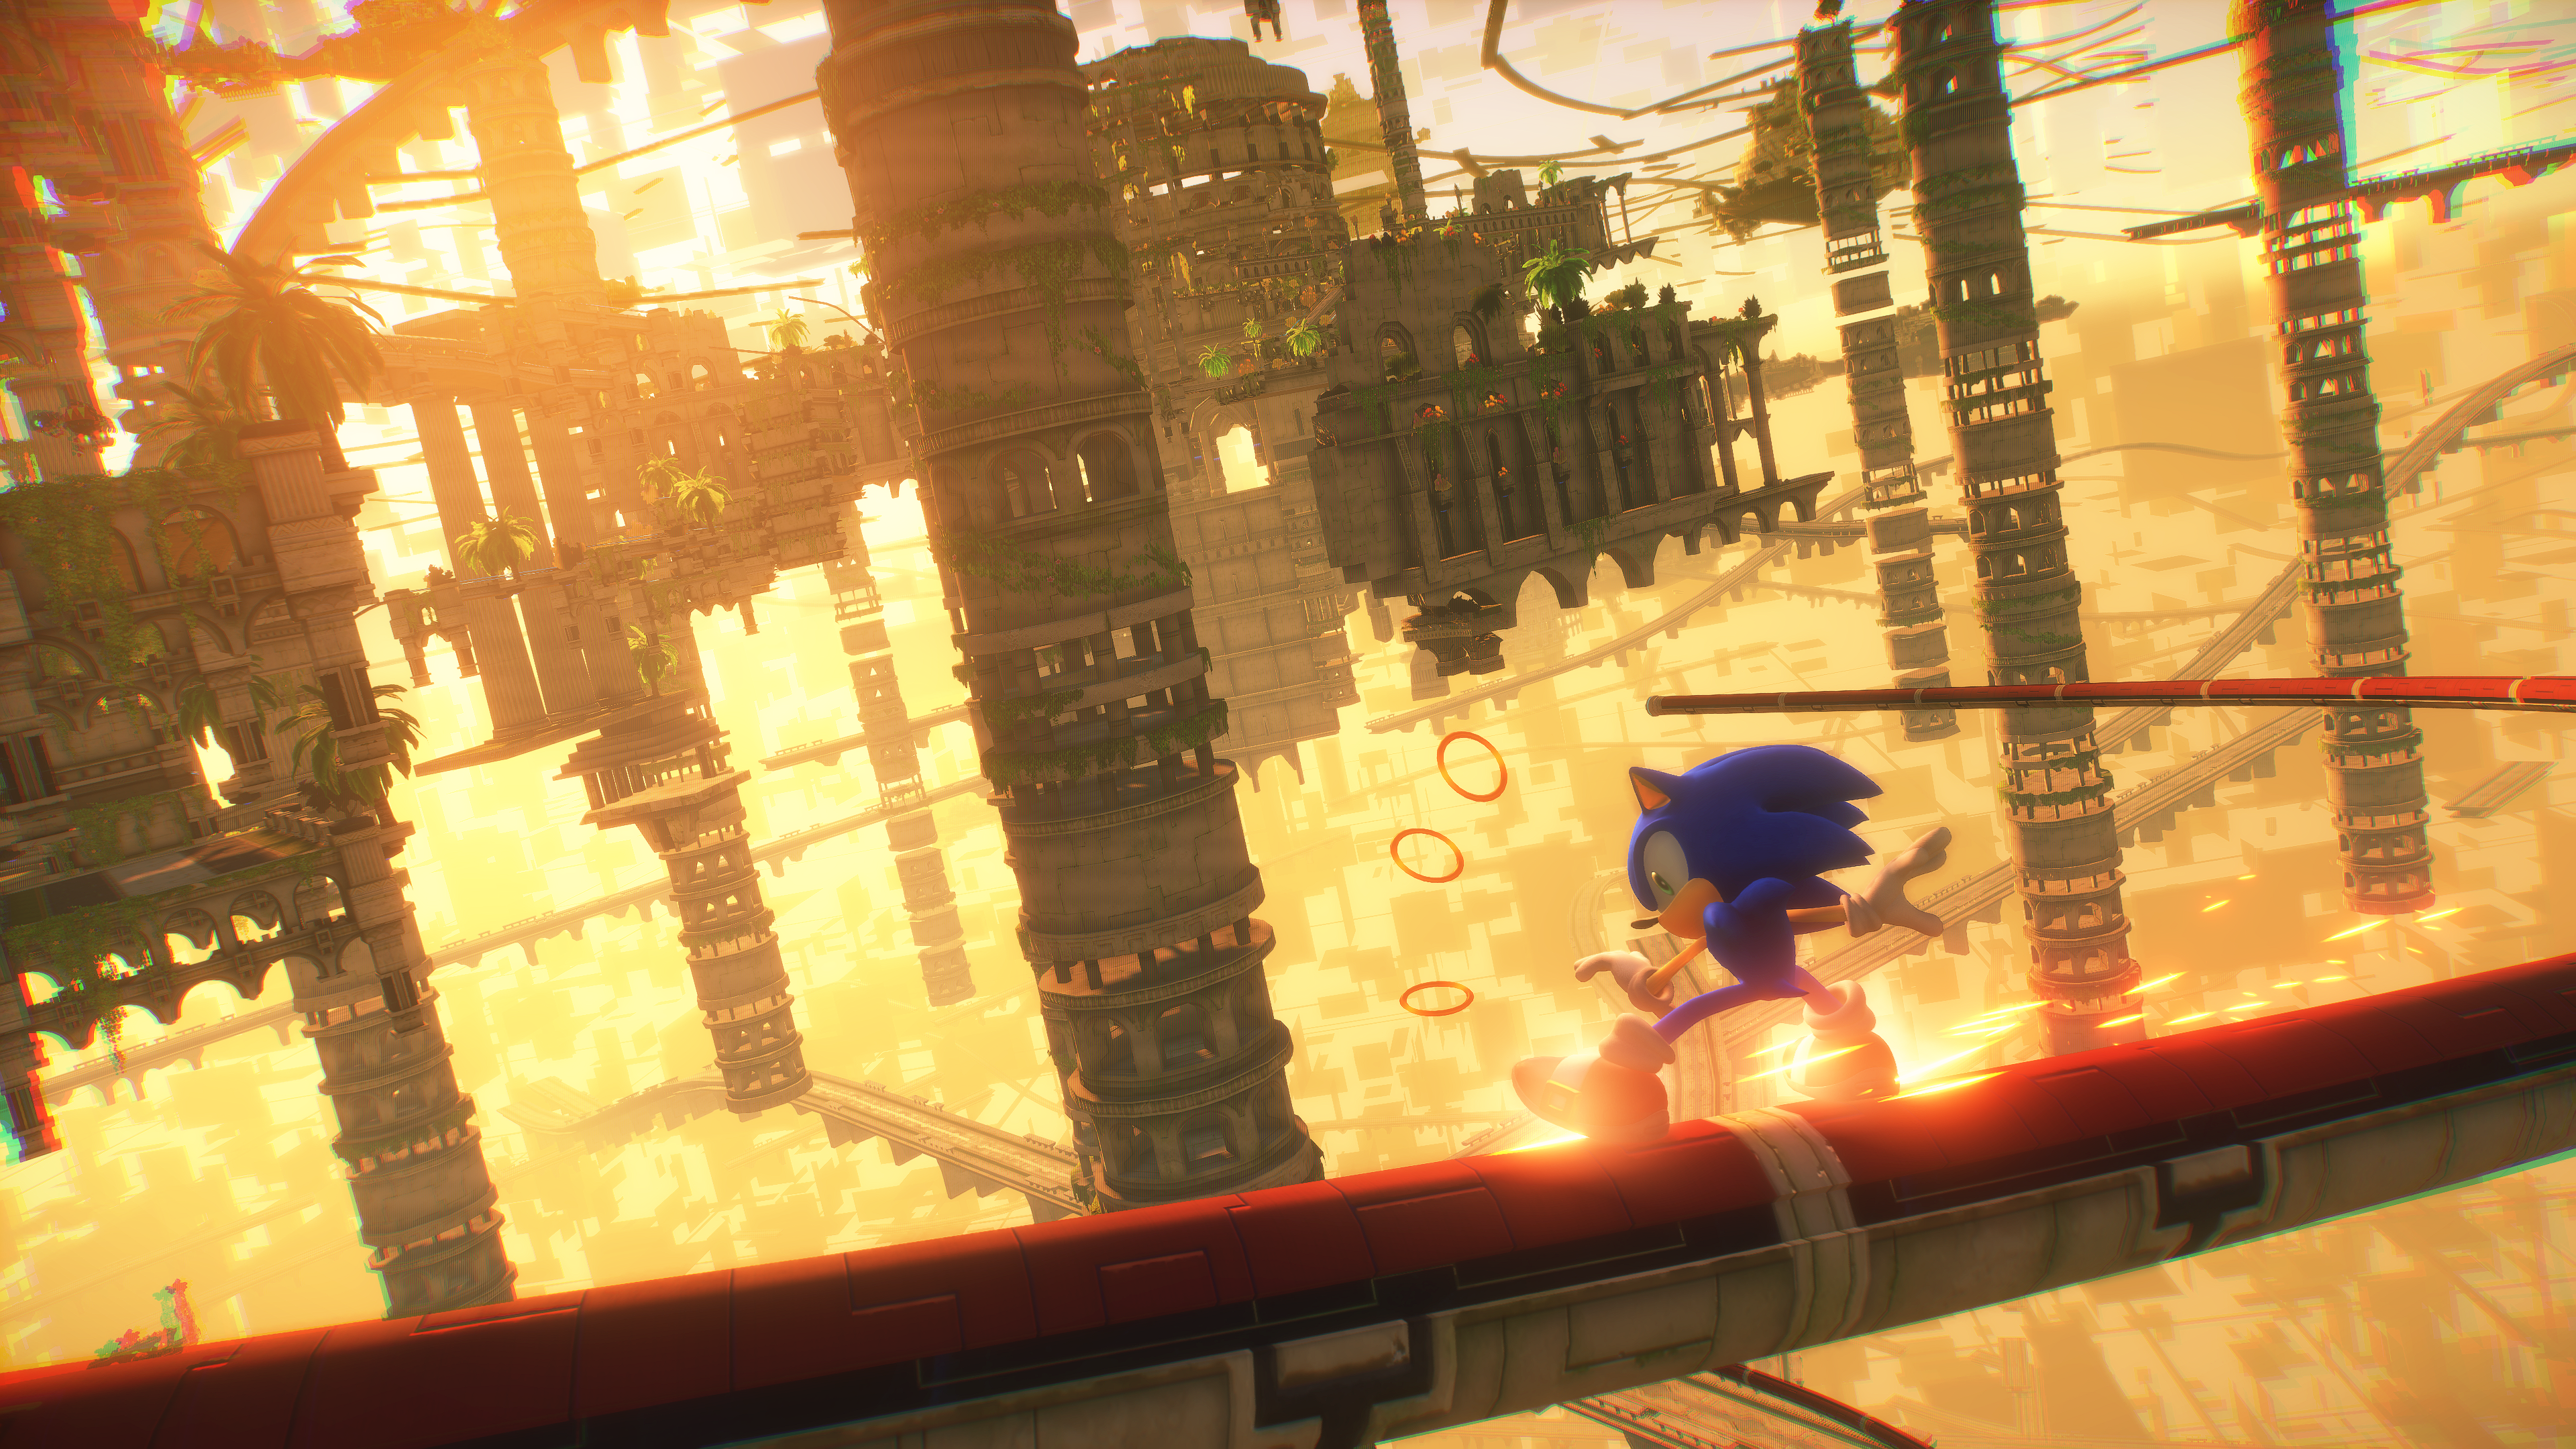 Sonic grinds through a cyberspace version of Sky Sanctuary Zone at sunset via Sonic Frontiers (2022), Sega